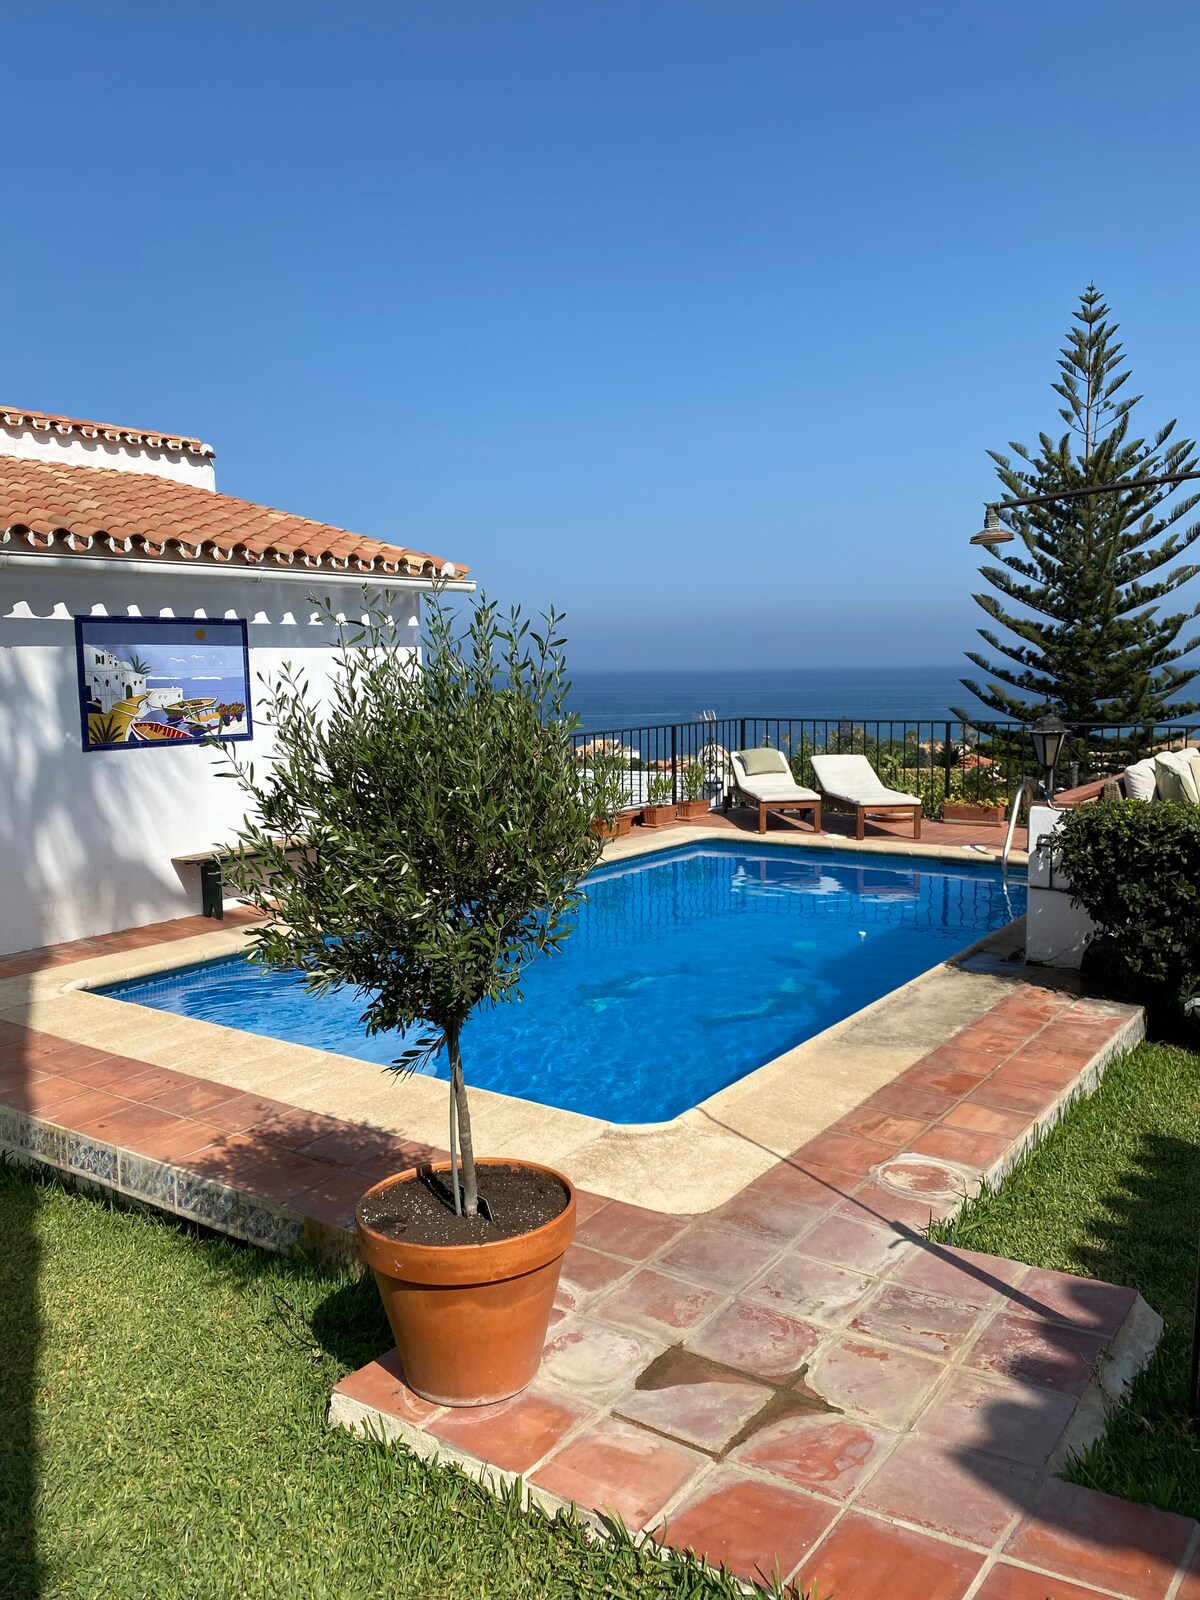 House with private pool and great Views!